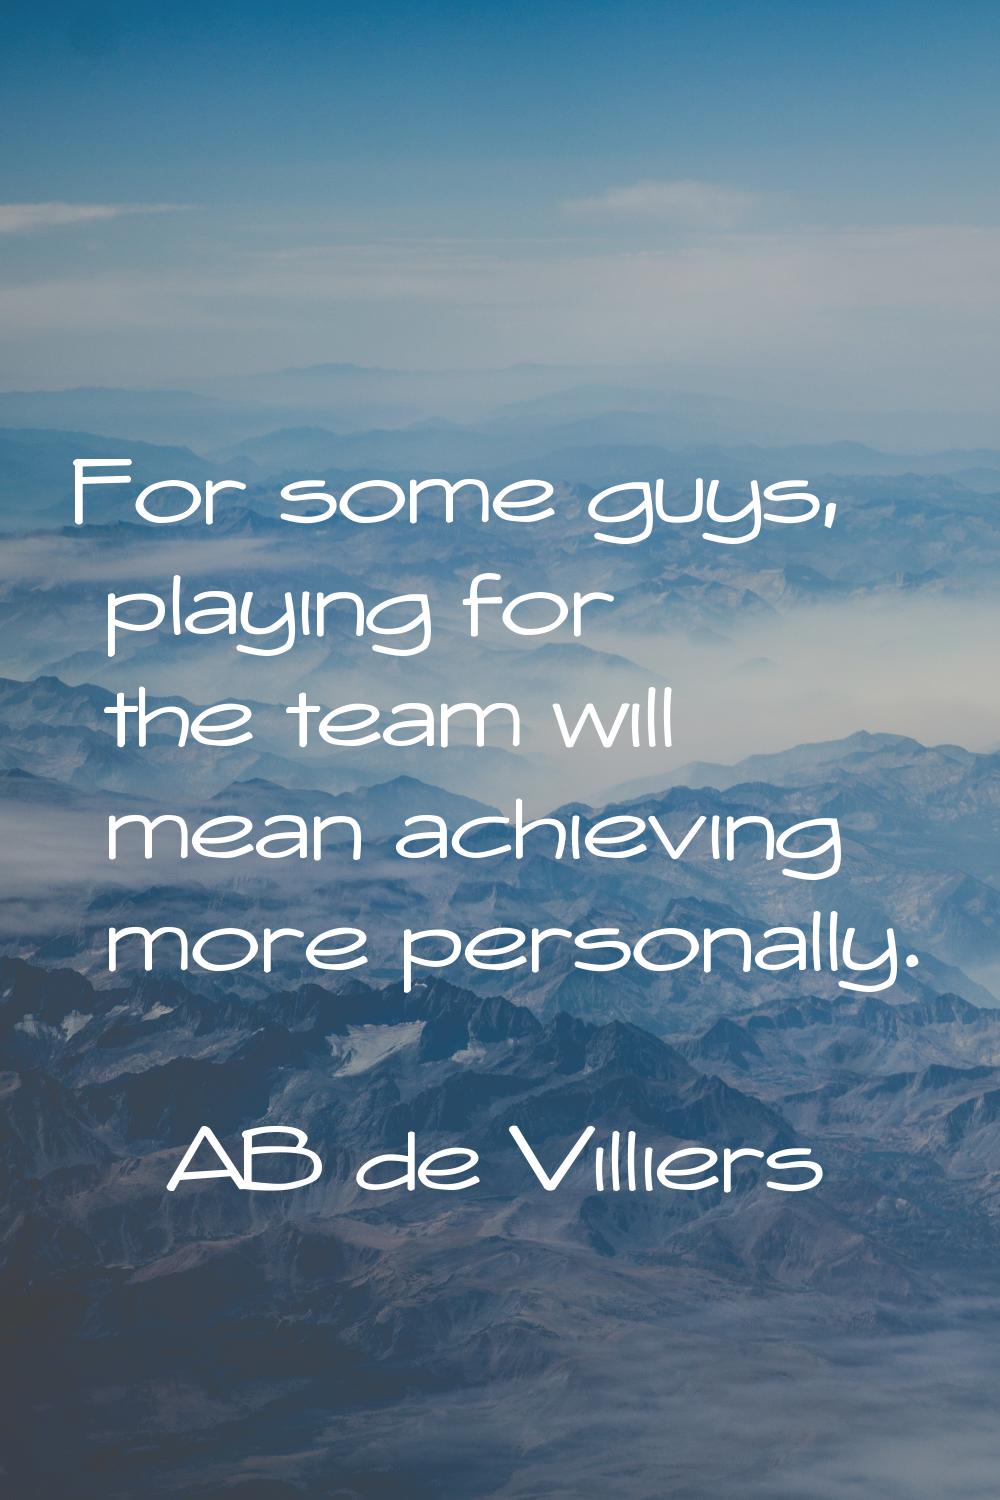 For some guys, playing for the team will mean achieving more personally.